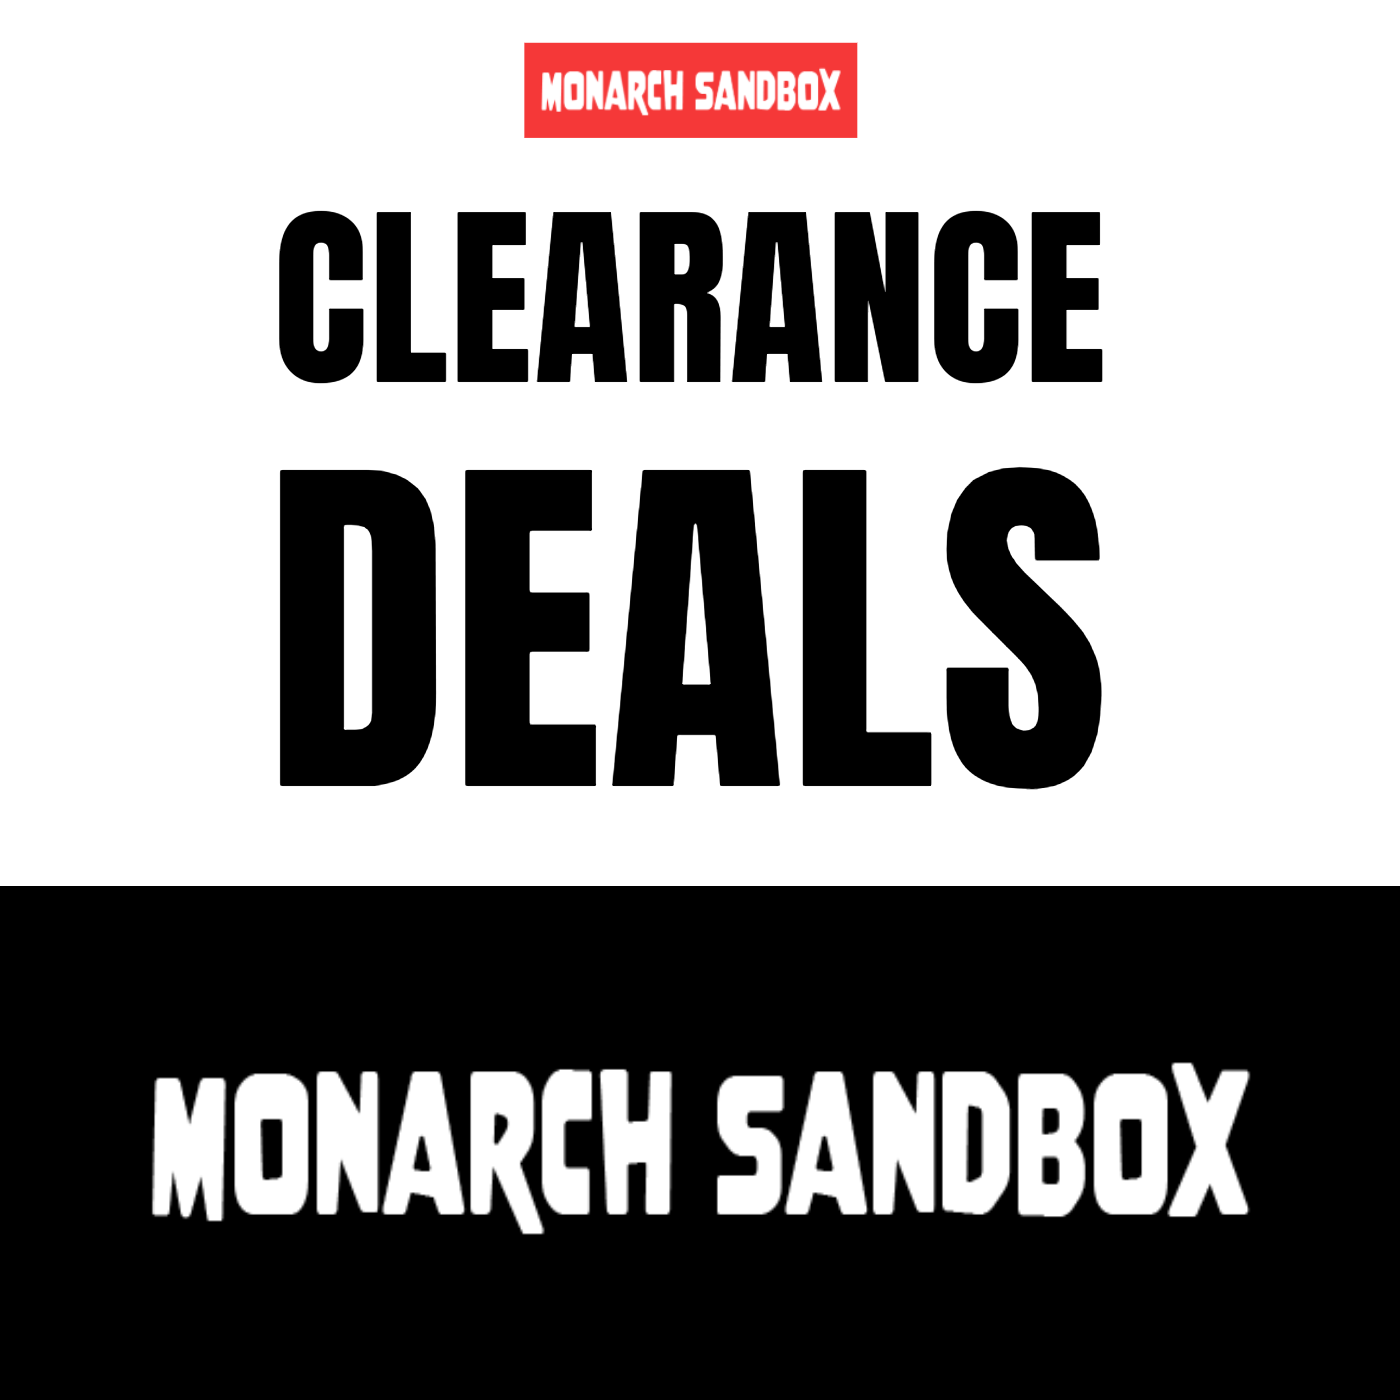 Unbeatable Clearance Deals: Save Up to 70% on Select Products!